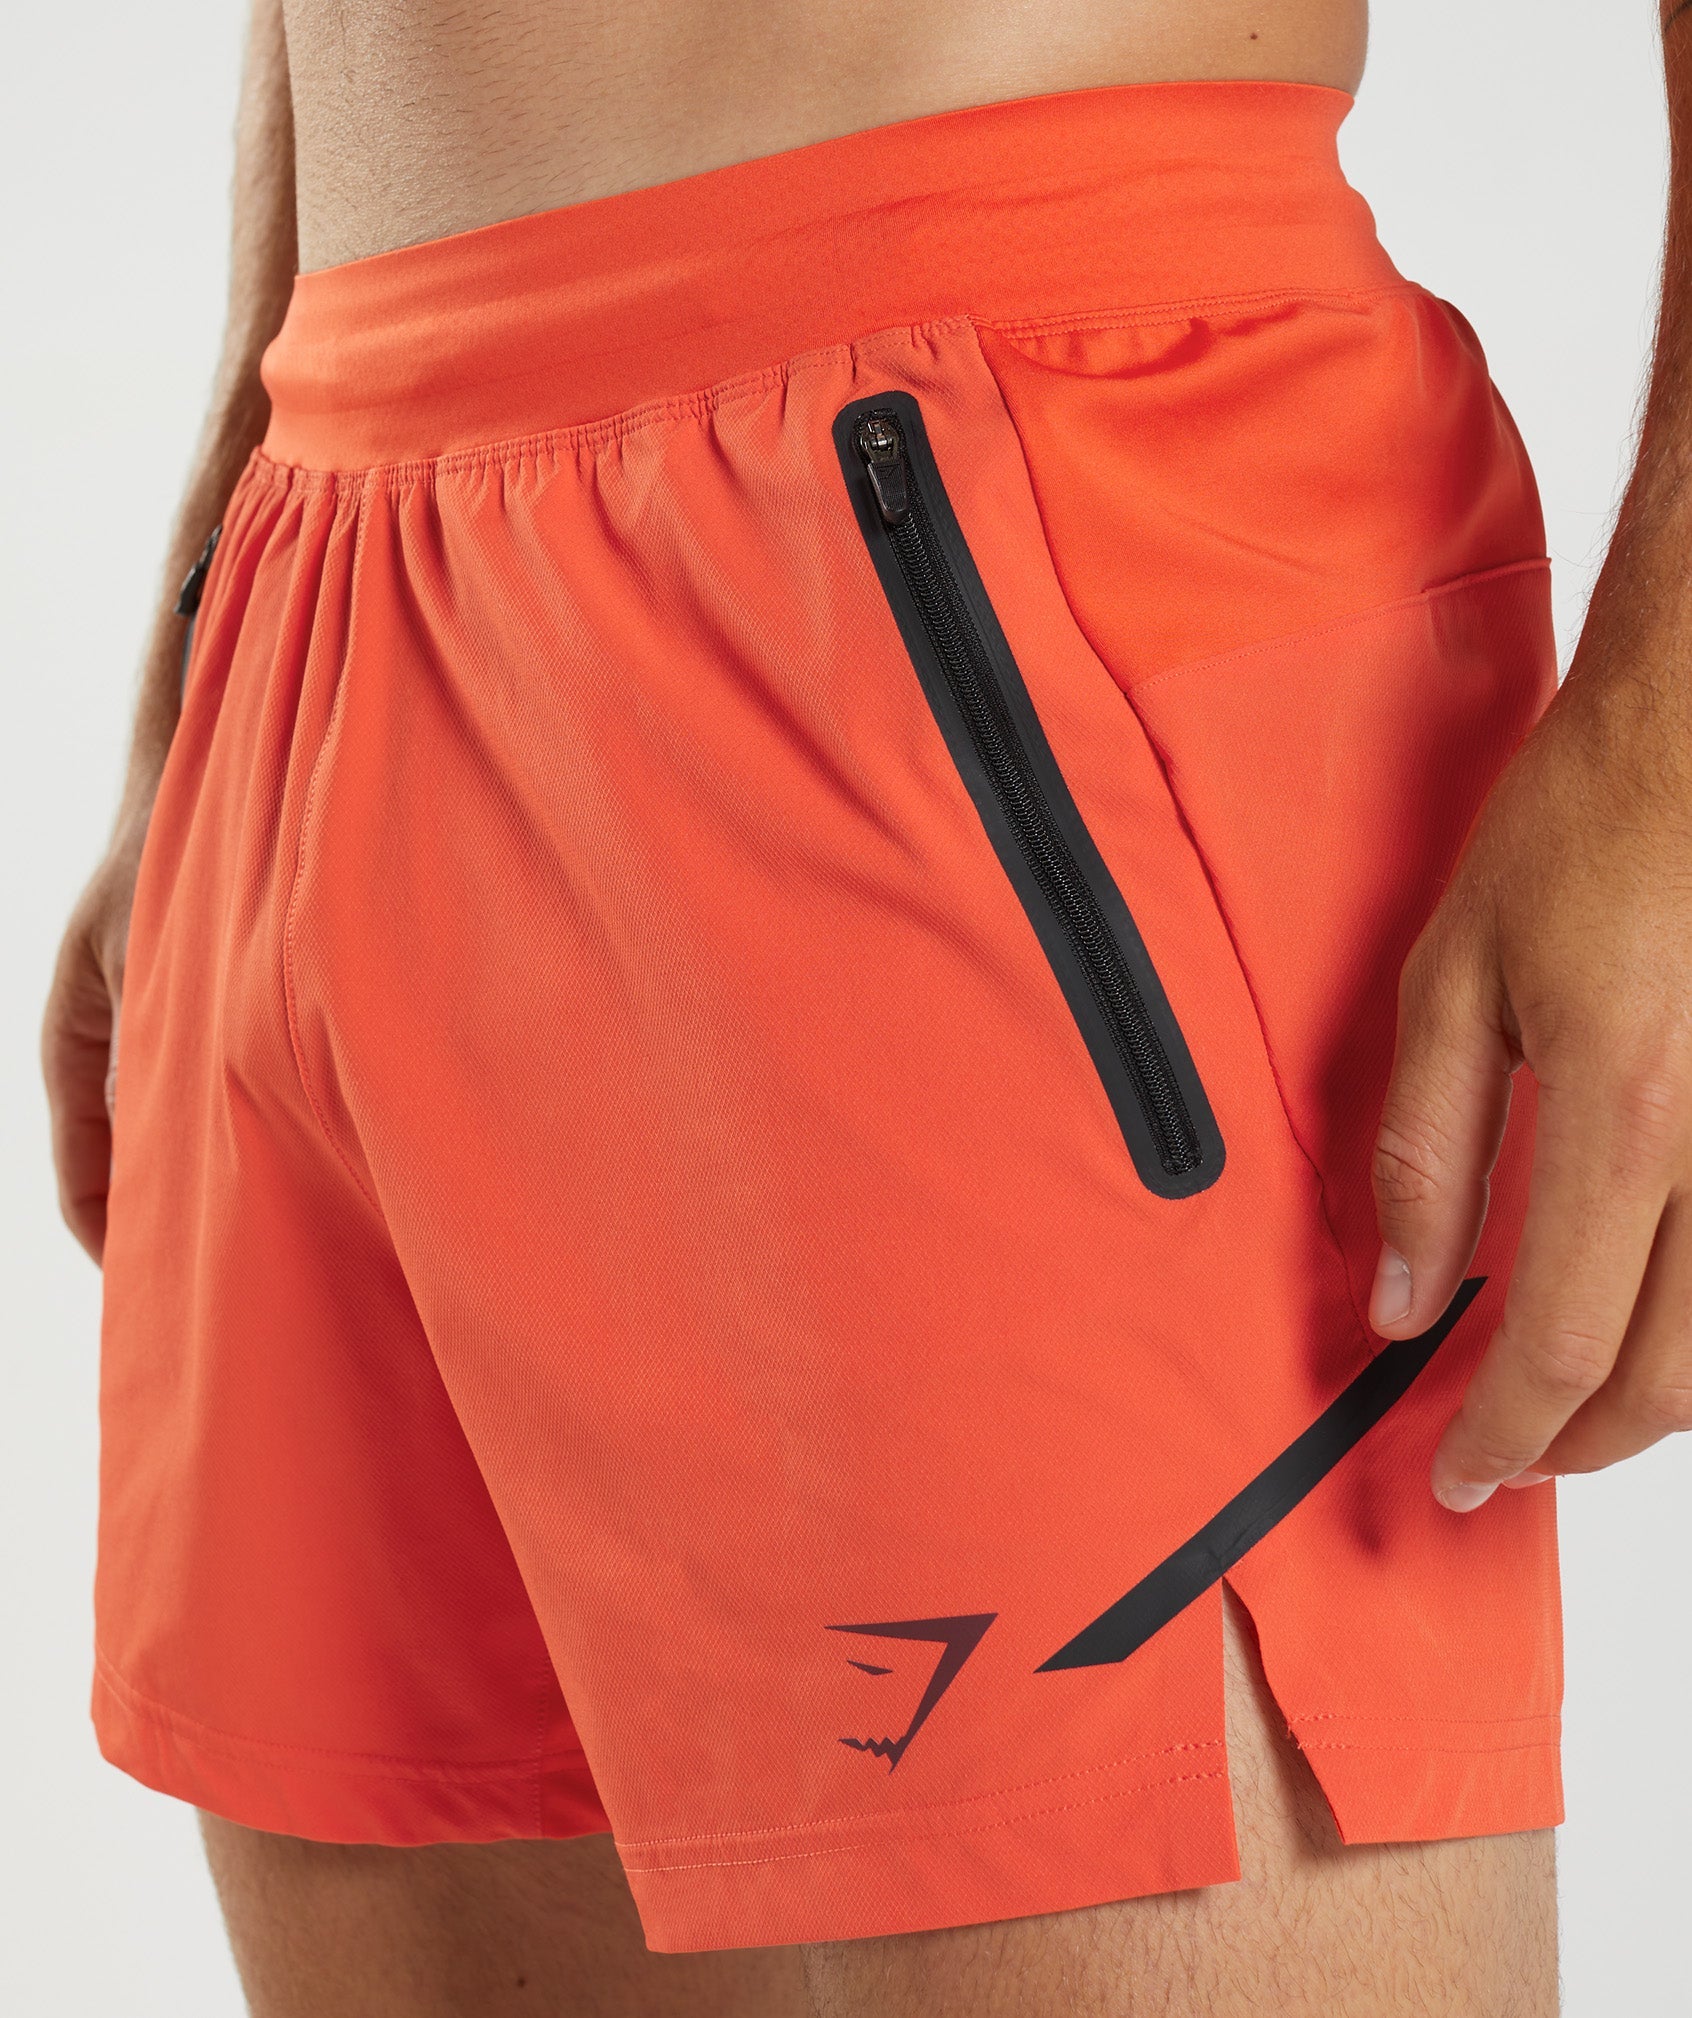 Apex 5" Perform Shorts in Pepper Red